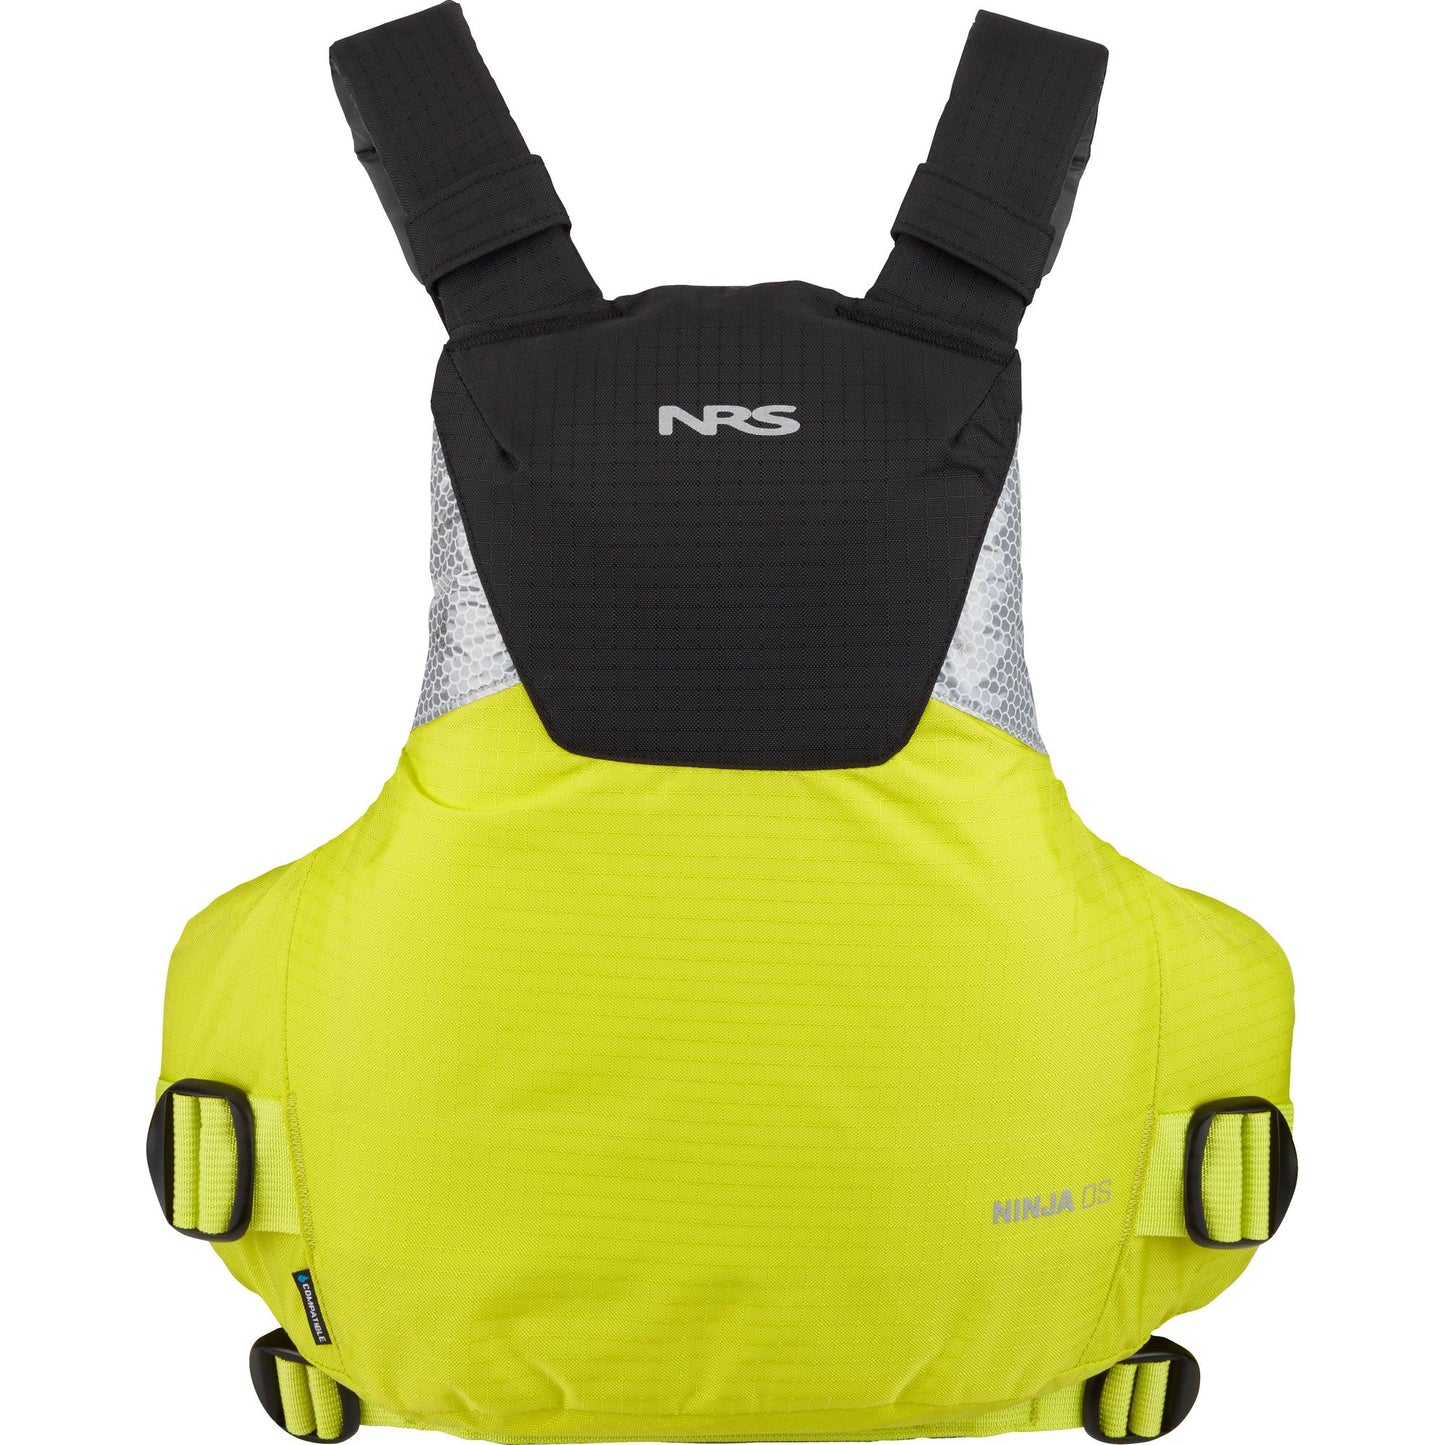 transport canada approved NRS pfd